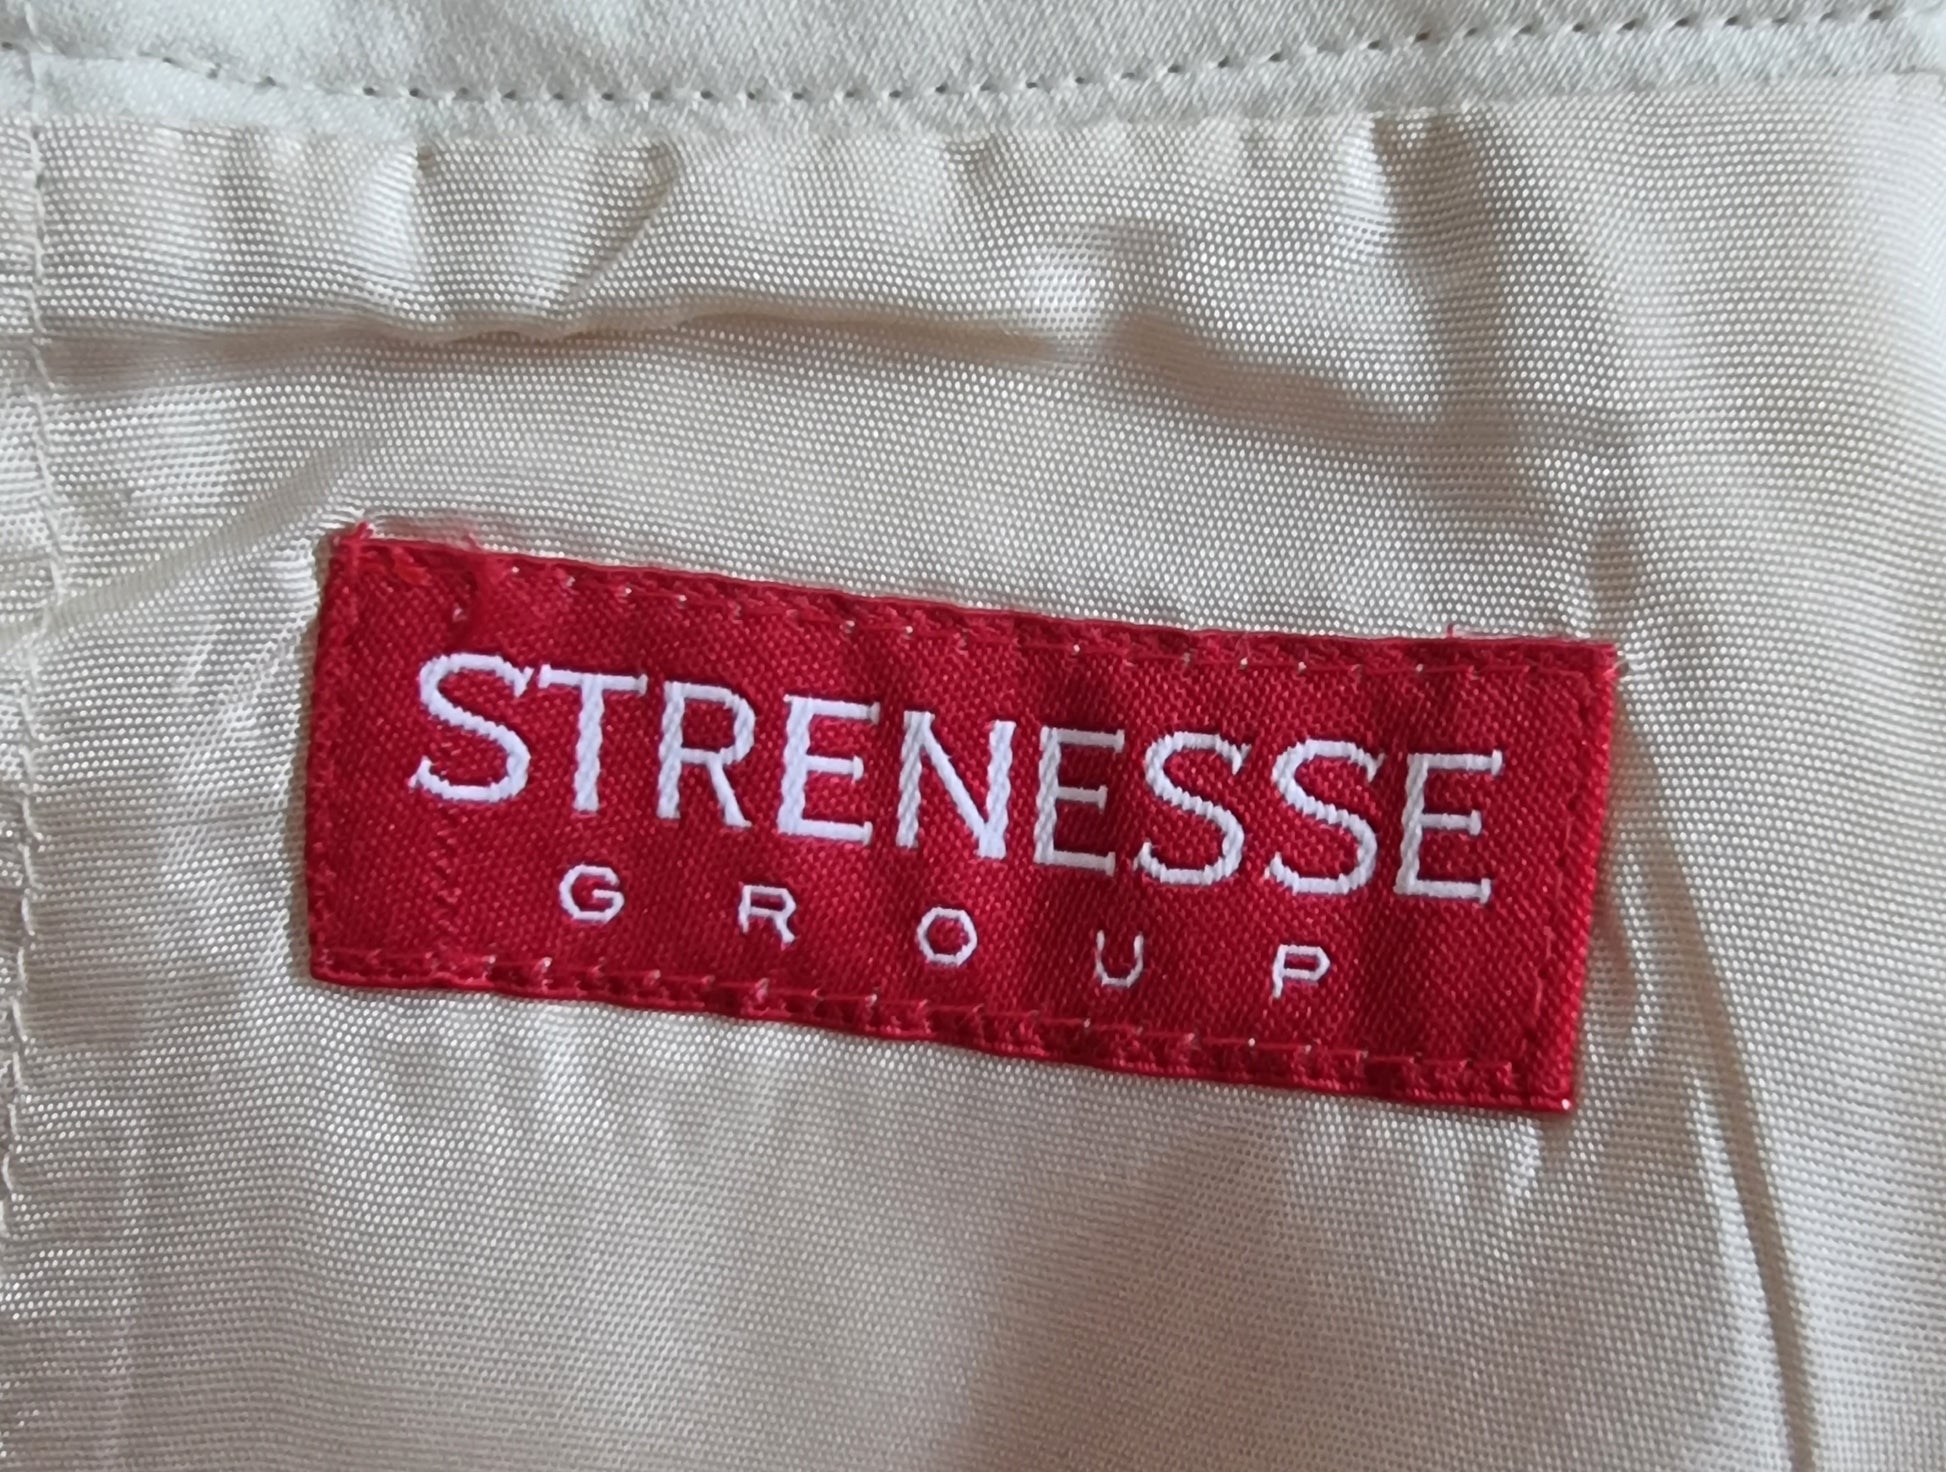 Strenesse Group Cream Lined Pencil Skirt UK 14 US 10 EU 42 Timeless Fashions